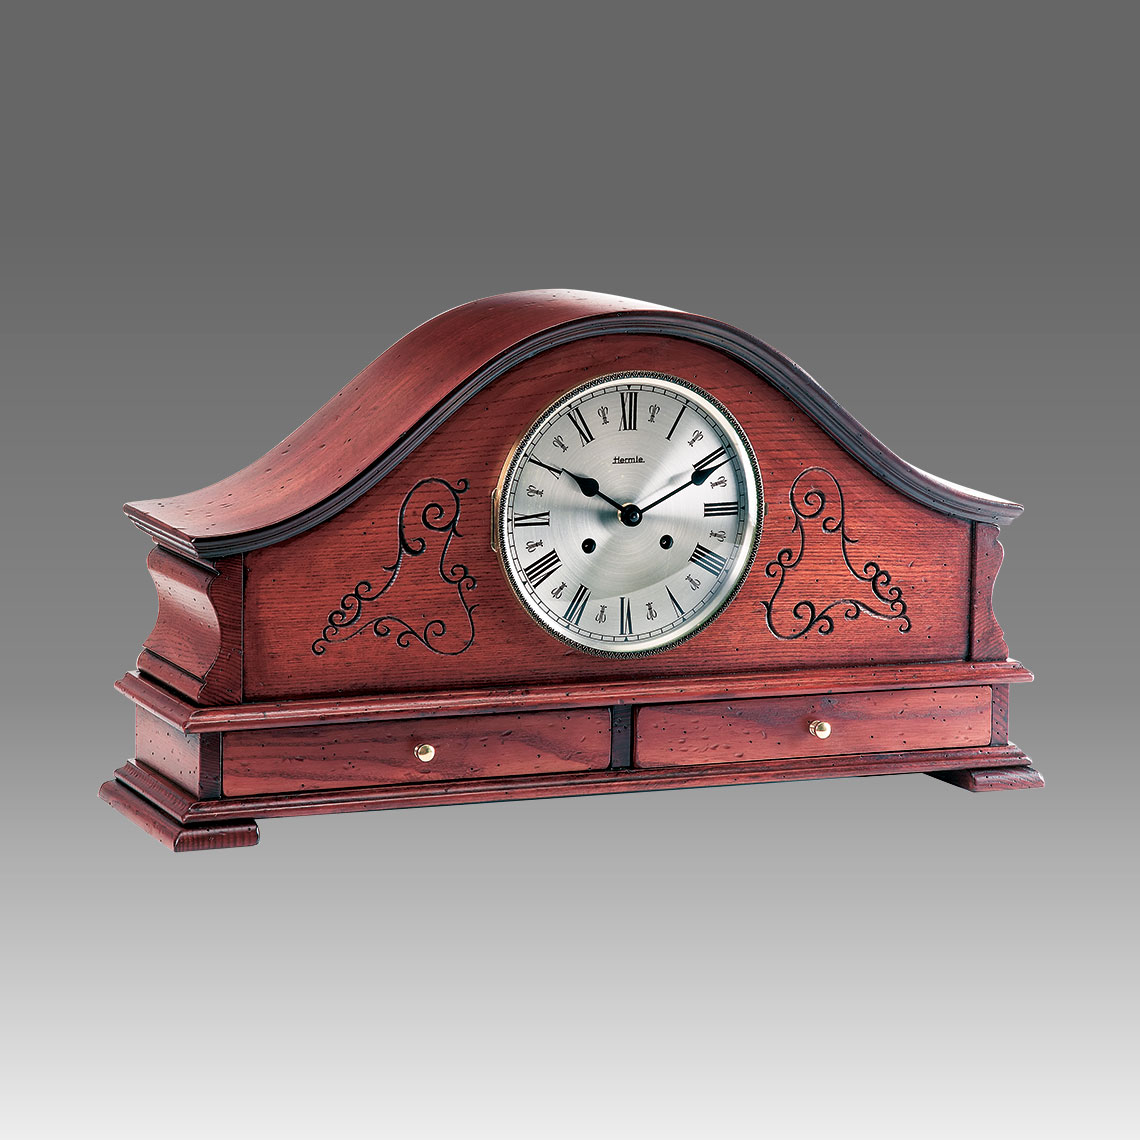 Mante Clock, Table Clock, Cimn Clock, Art.335/1 Walnut with curving and drawers - Bim Bam melody on Bells, Silver round dial